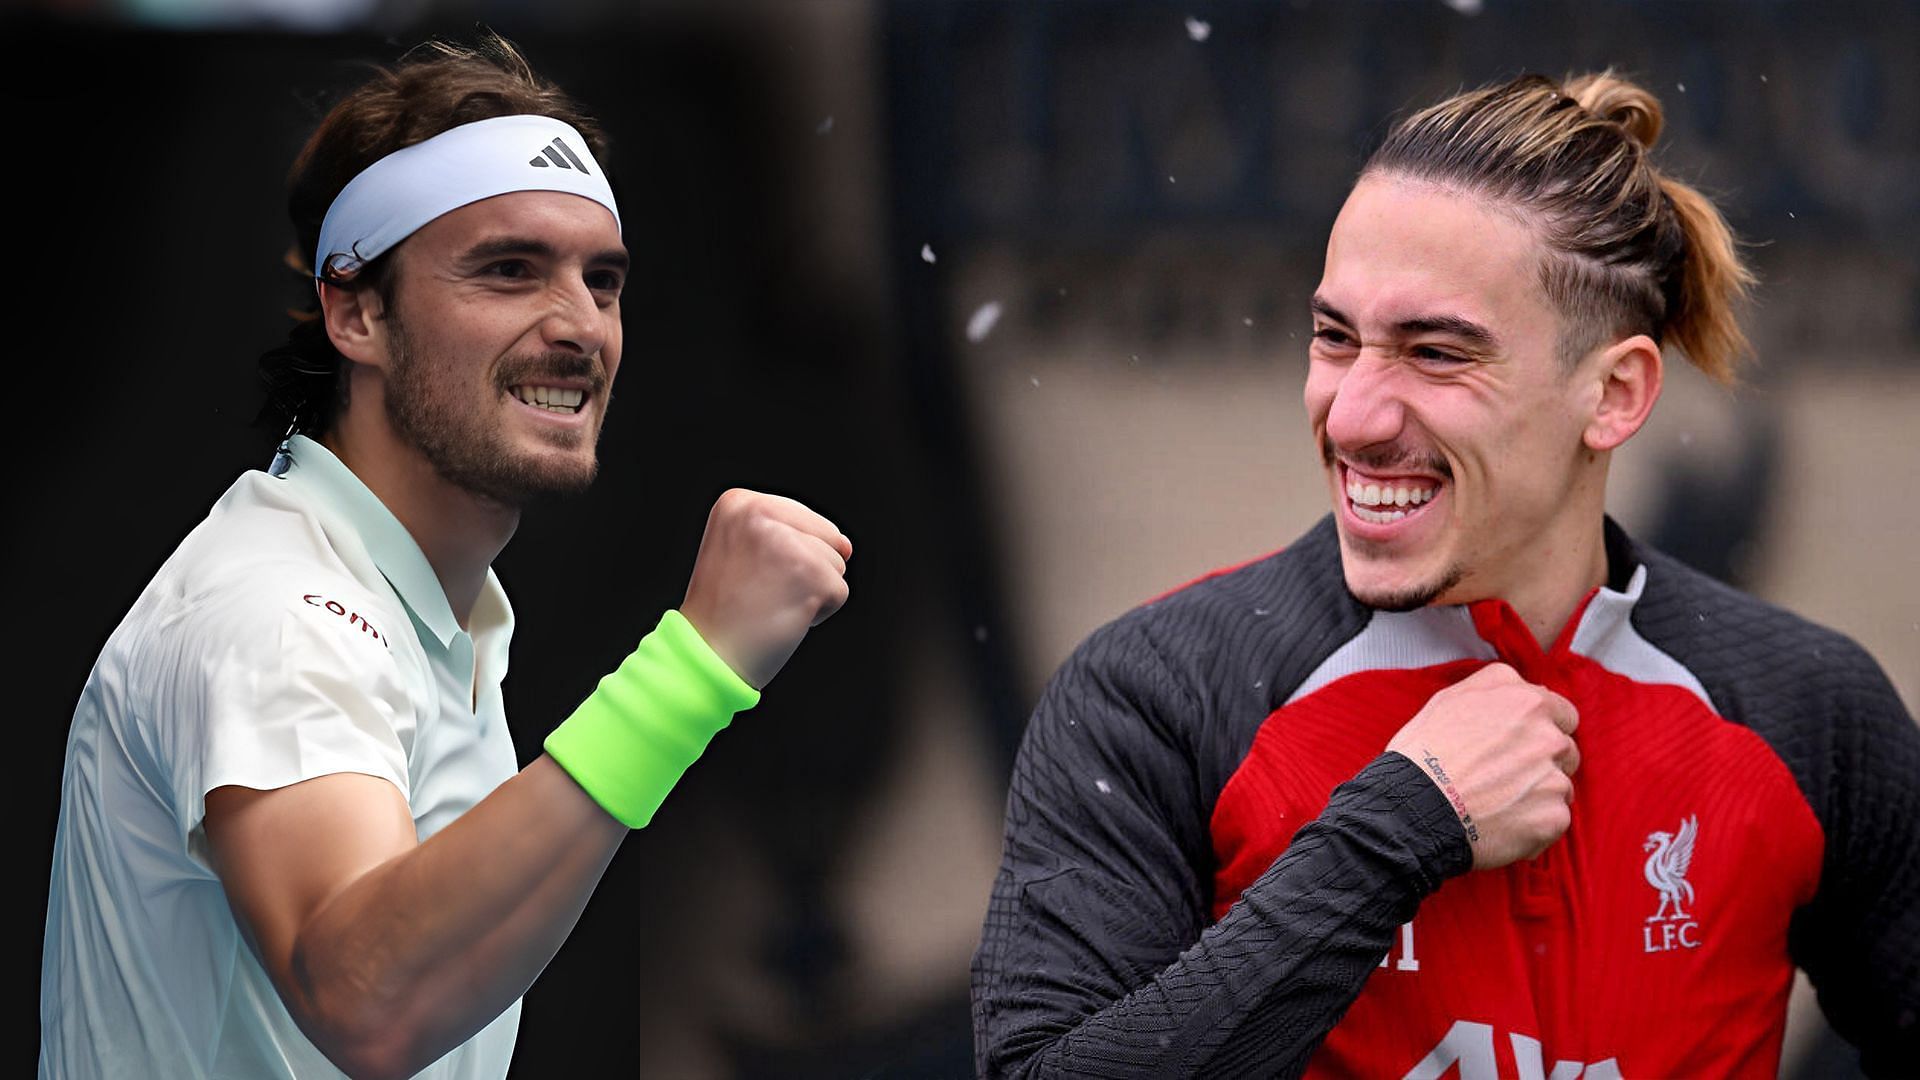 WATCH: Stefanos Tsitsipas shows off his ball skills in fun challenge, calls on fellow Greek and Liverpool star Kostas Tsimikas to follow suit